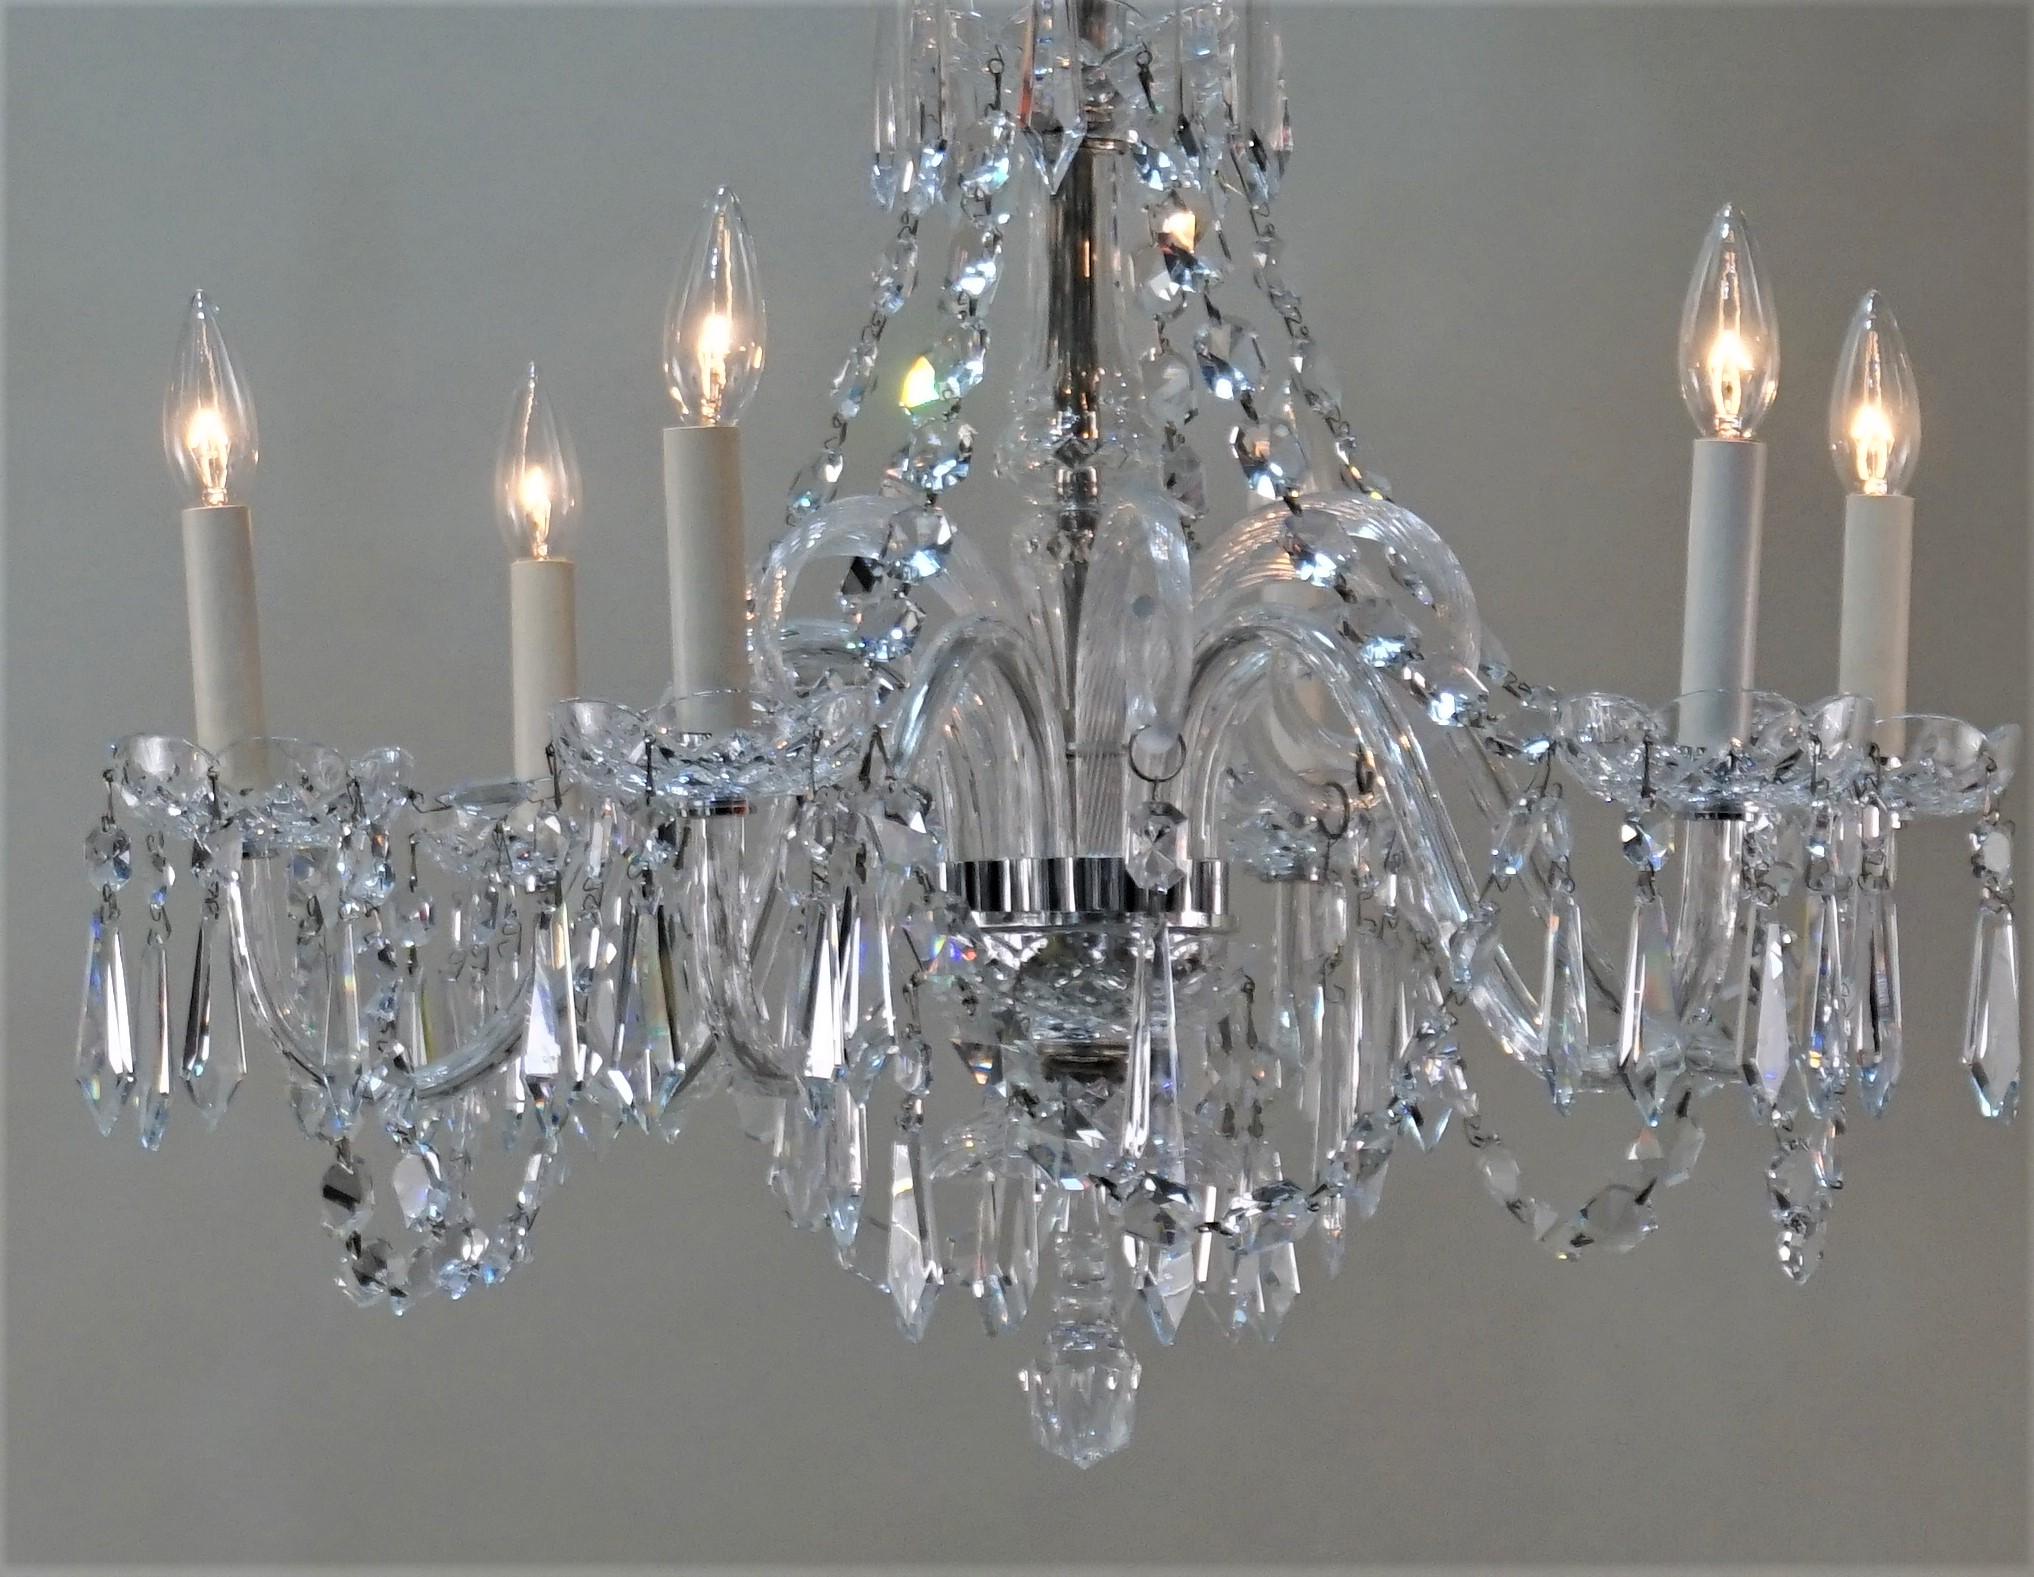 Elegant classic design six light crystal chandelier by Waterford.
Measurement: width 26